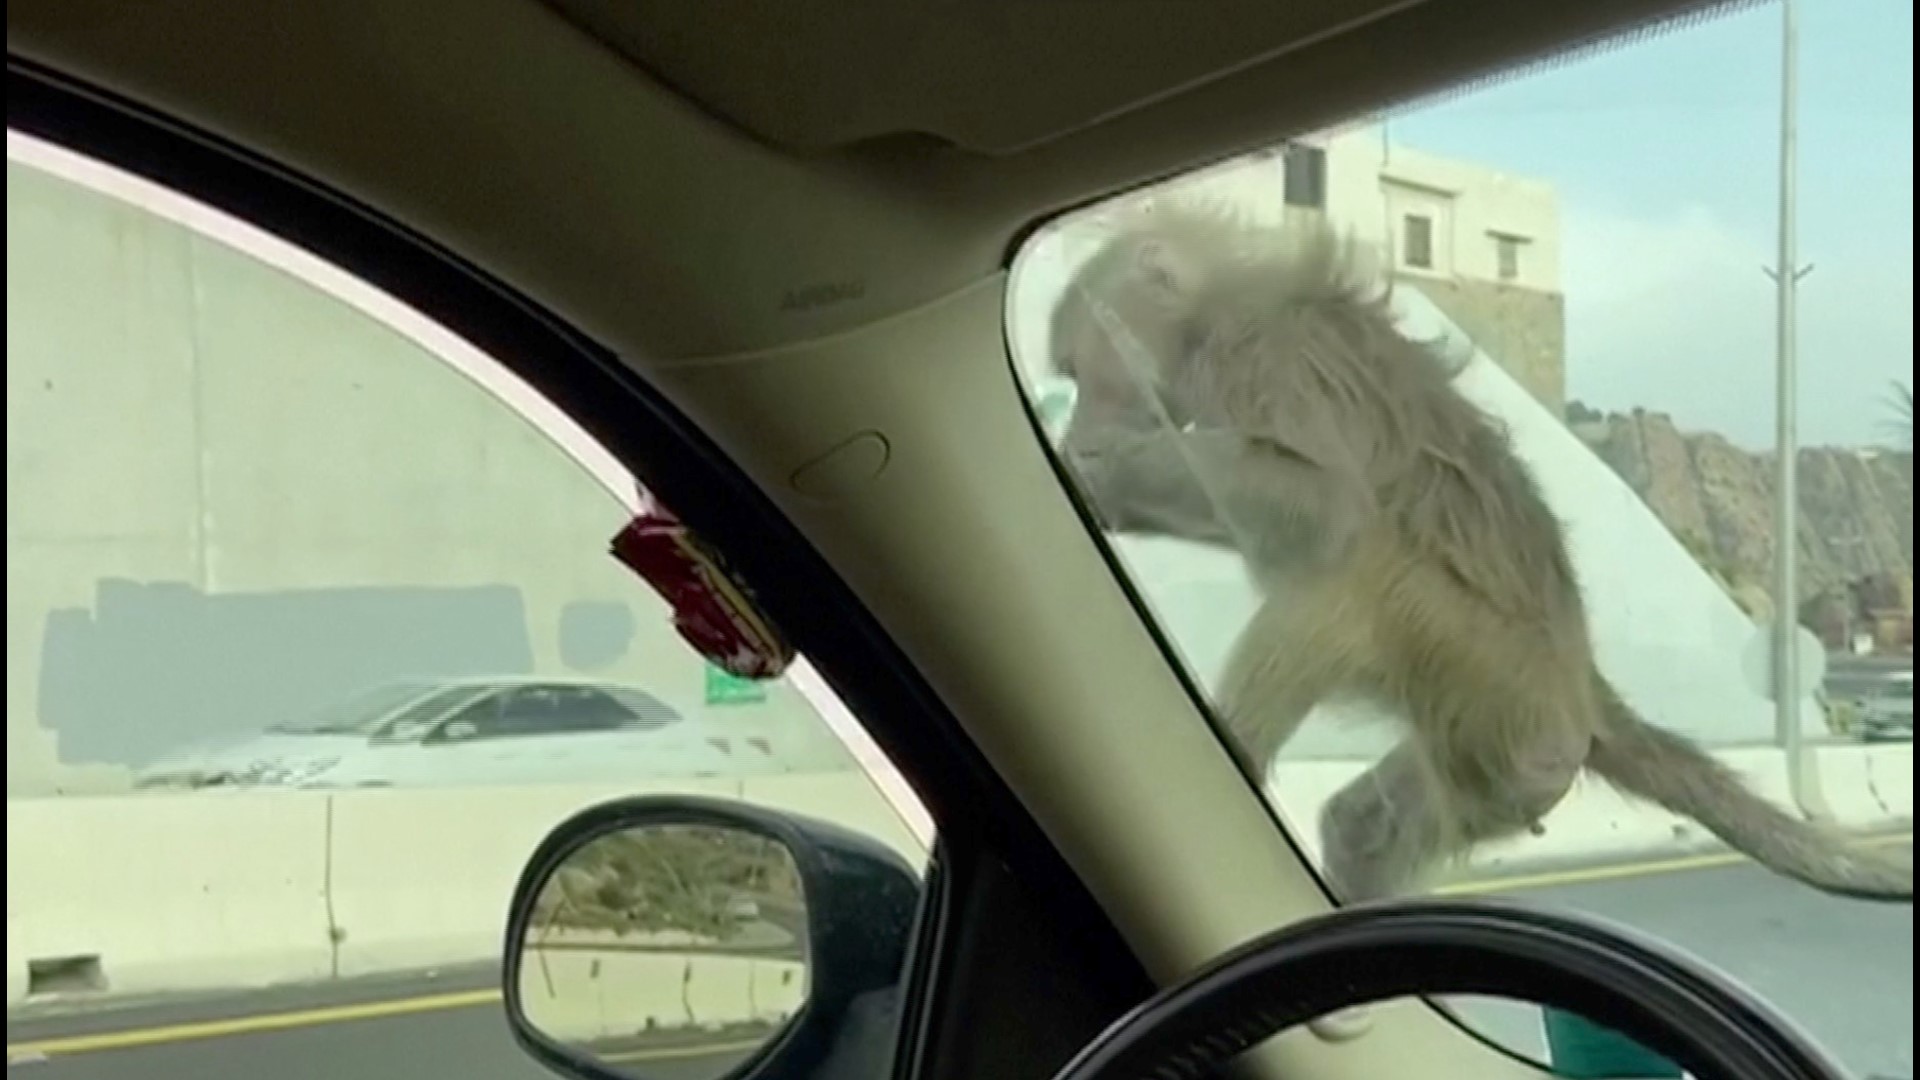 Monkey Shares Meal With Driver Through Car Window in Funny Video 